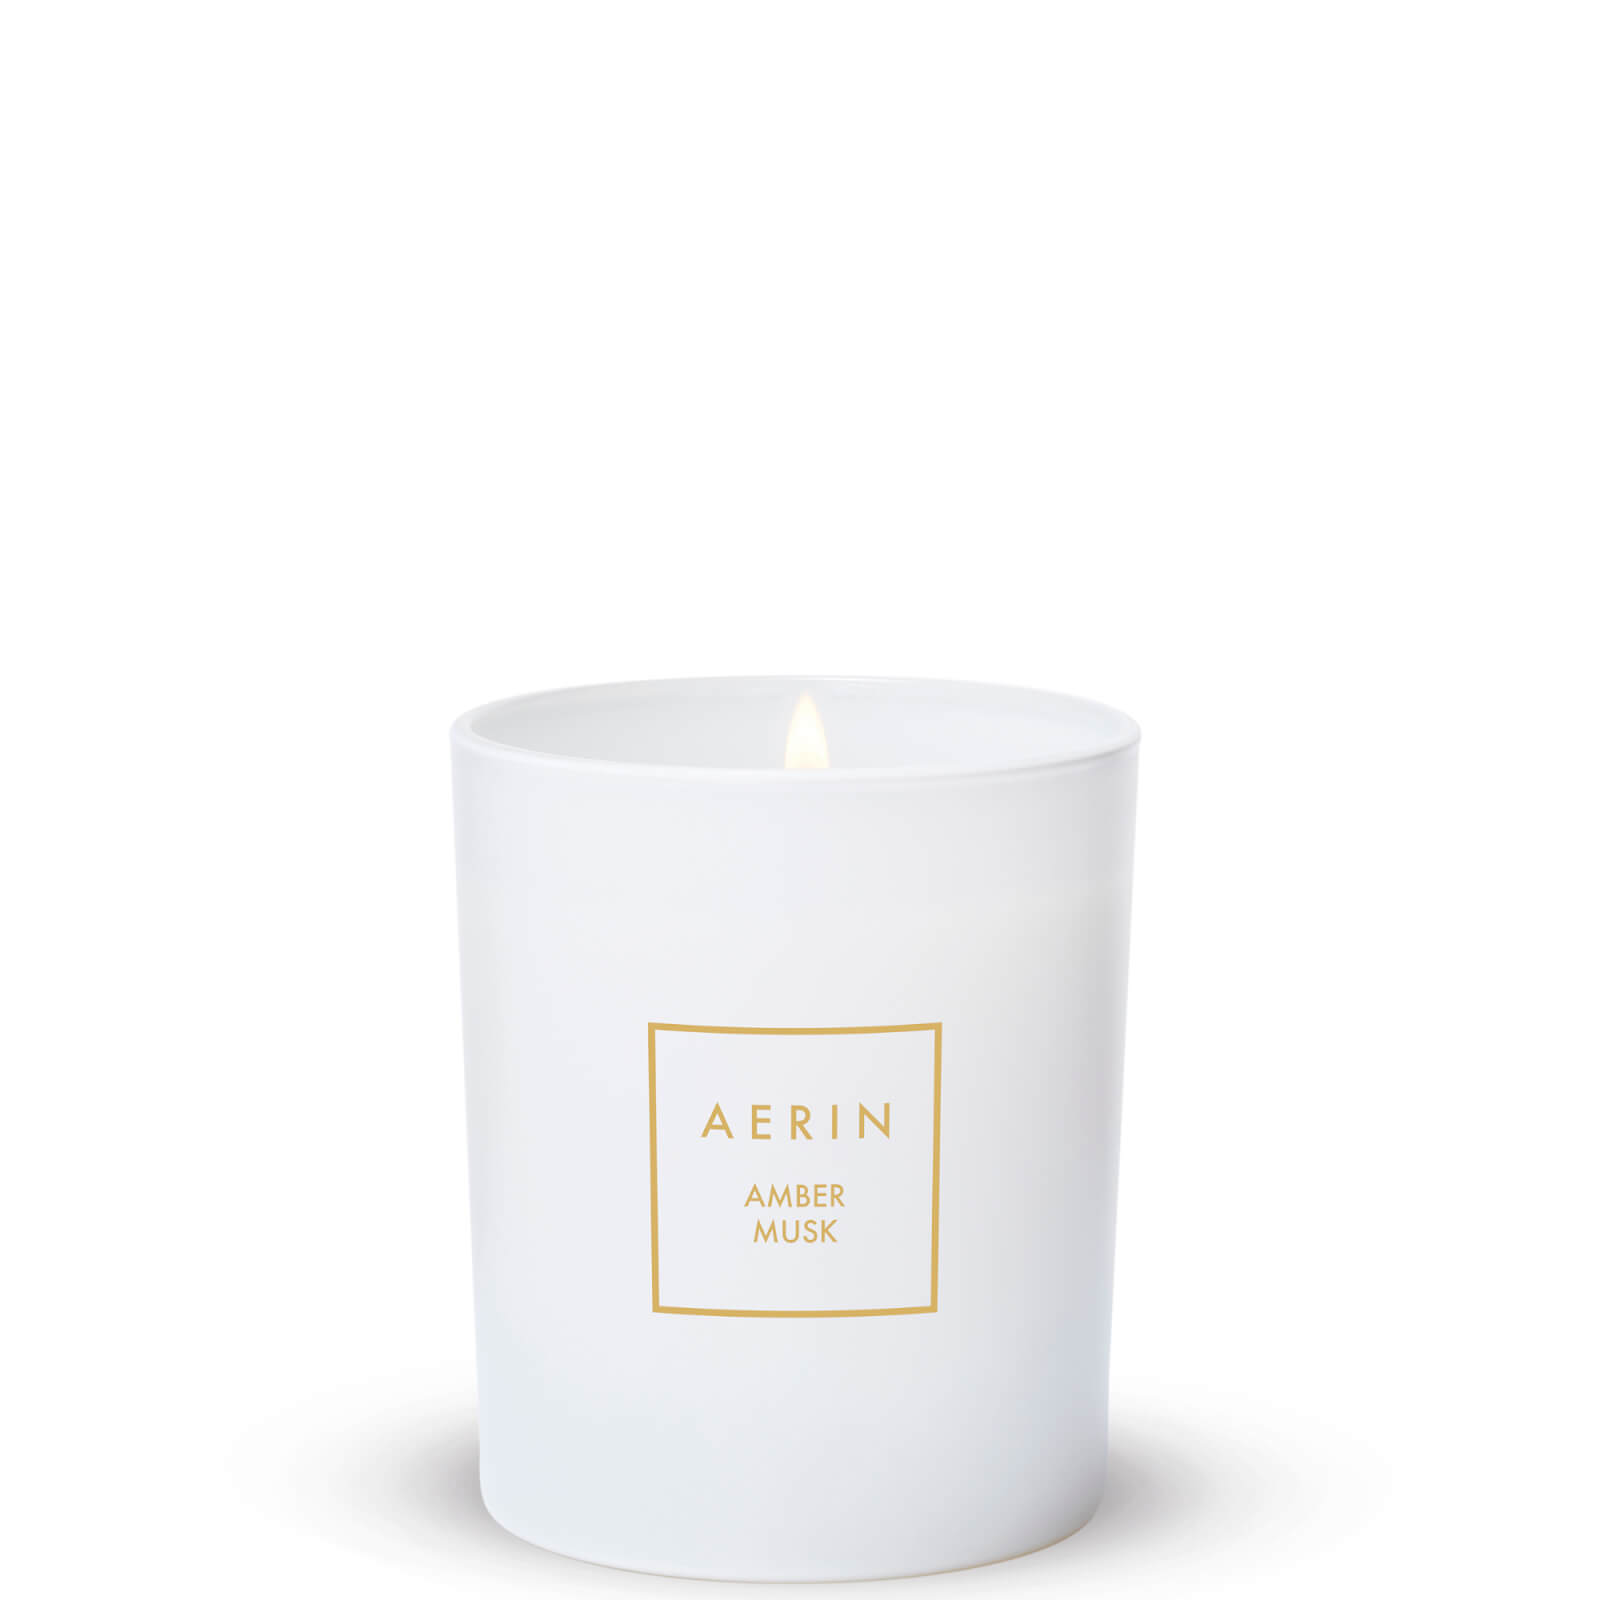 Image of AERIN Amber Musk Candle